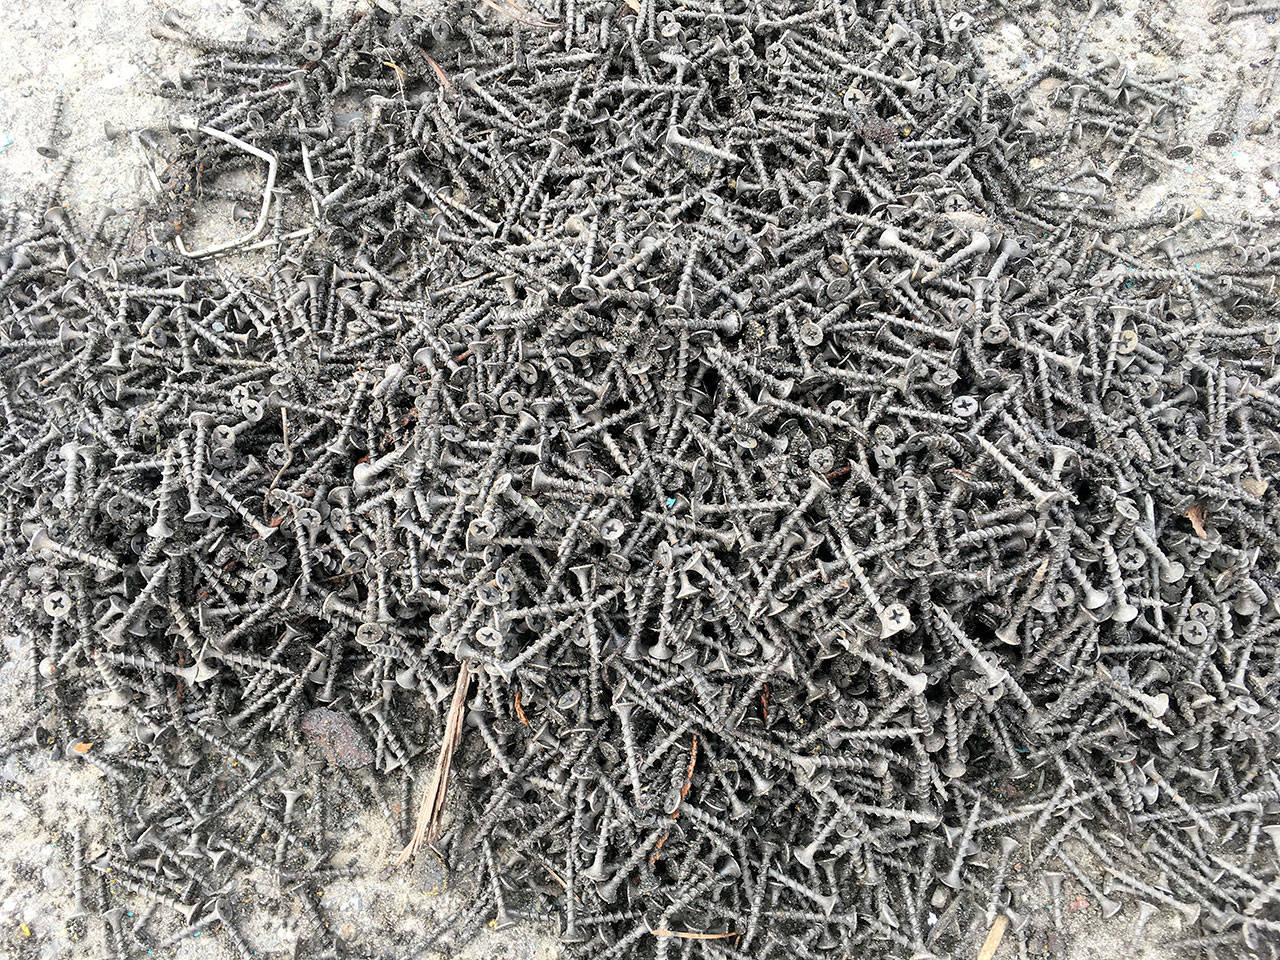 Crews with the state Department of Transportation recovered hundreds of screws from U.S. Highway 101 east of Port Angeles. (State Patrol)